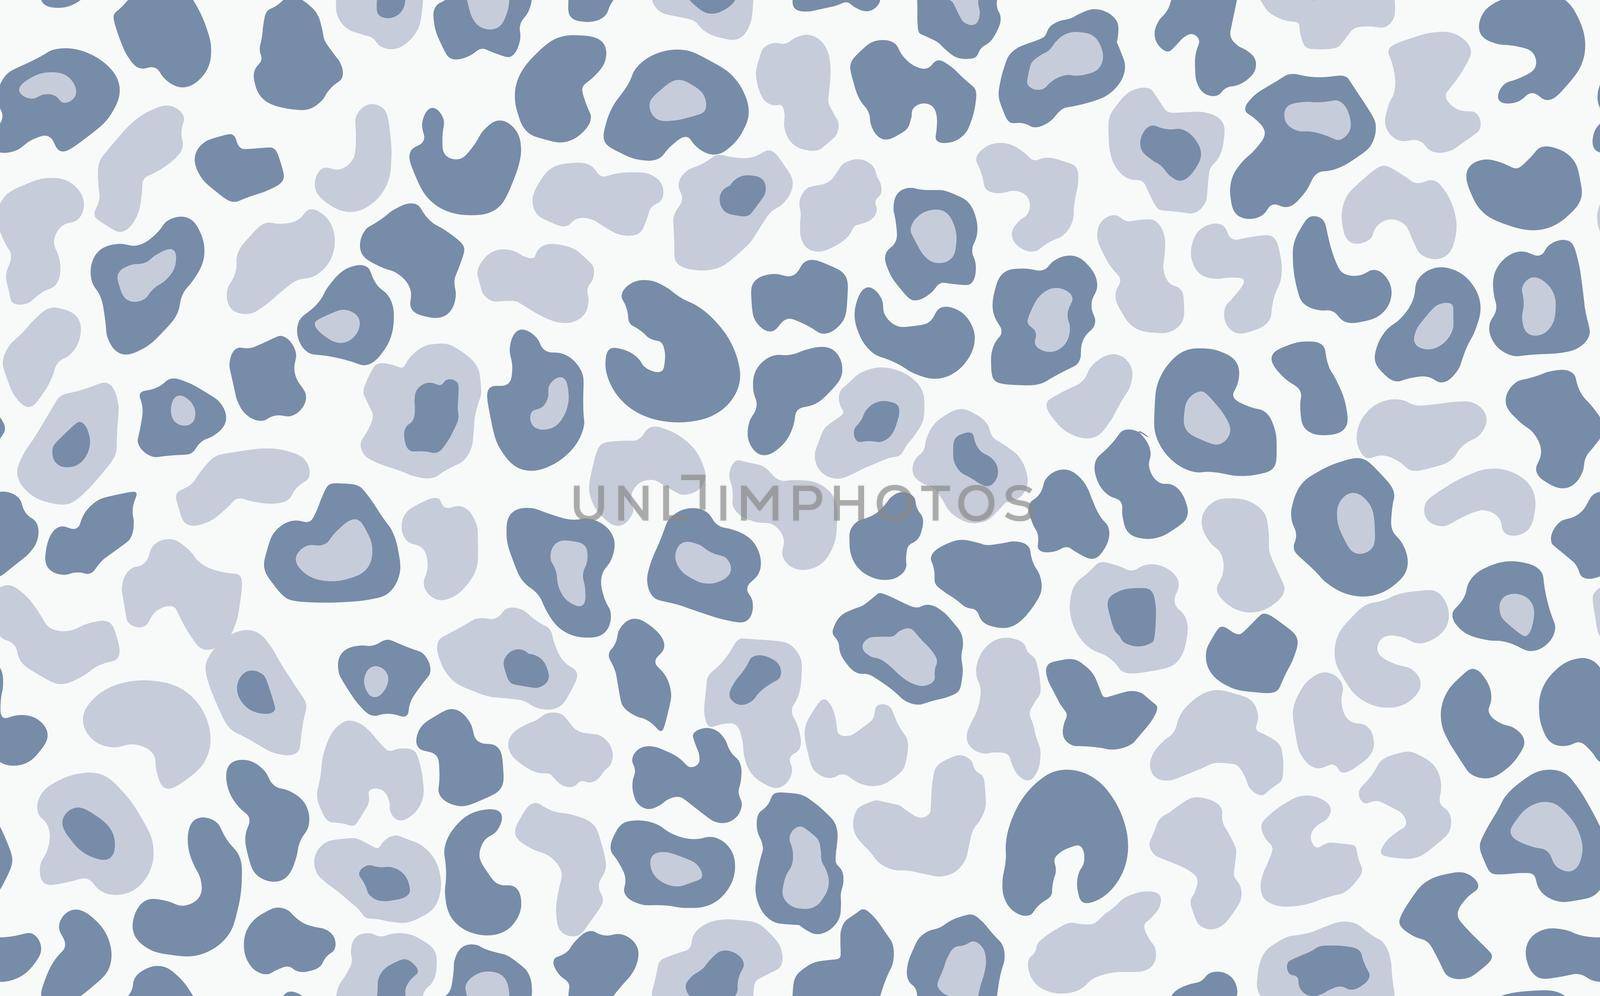 Abstract modern leopard seamless pattern. Animals trendy background. Grey decorative vector stock illustration for print, card, postcard, fabric, textile. Modern ornament of stylized skin.